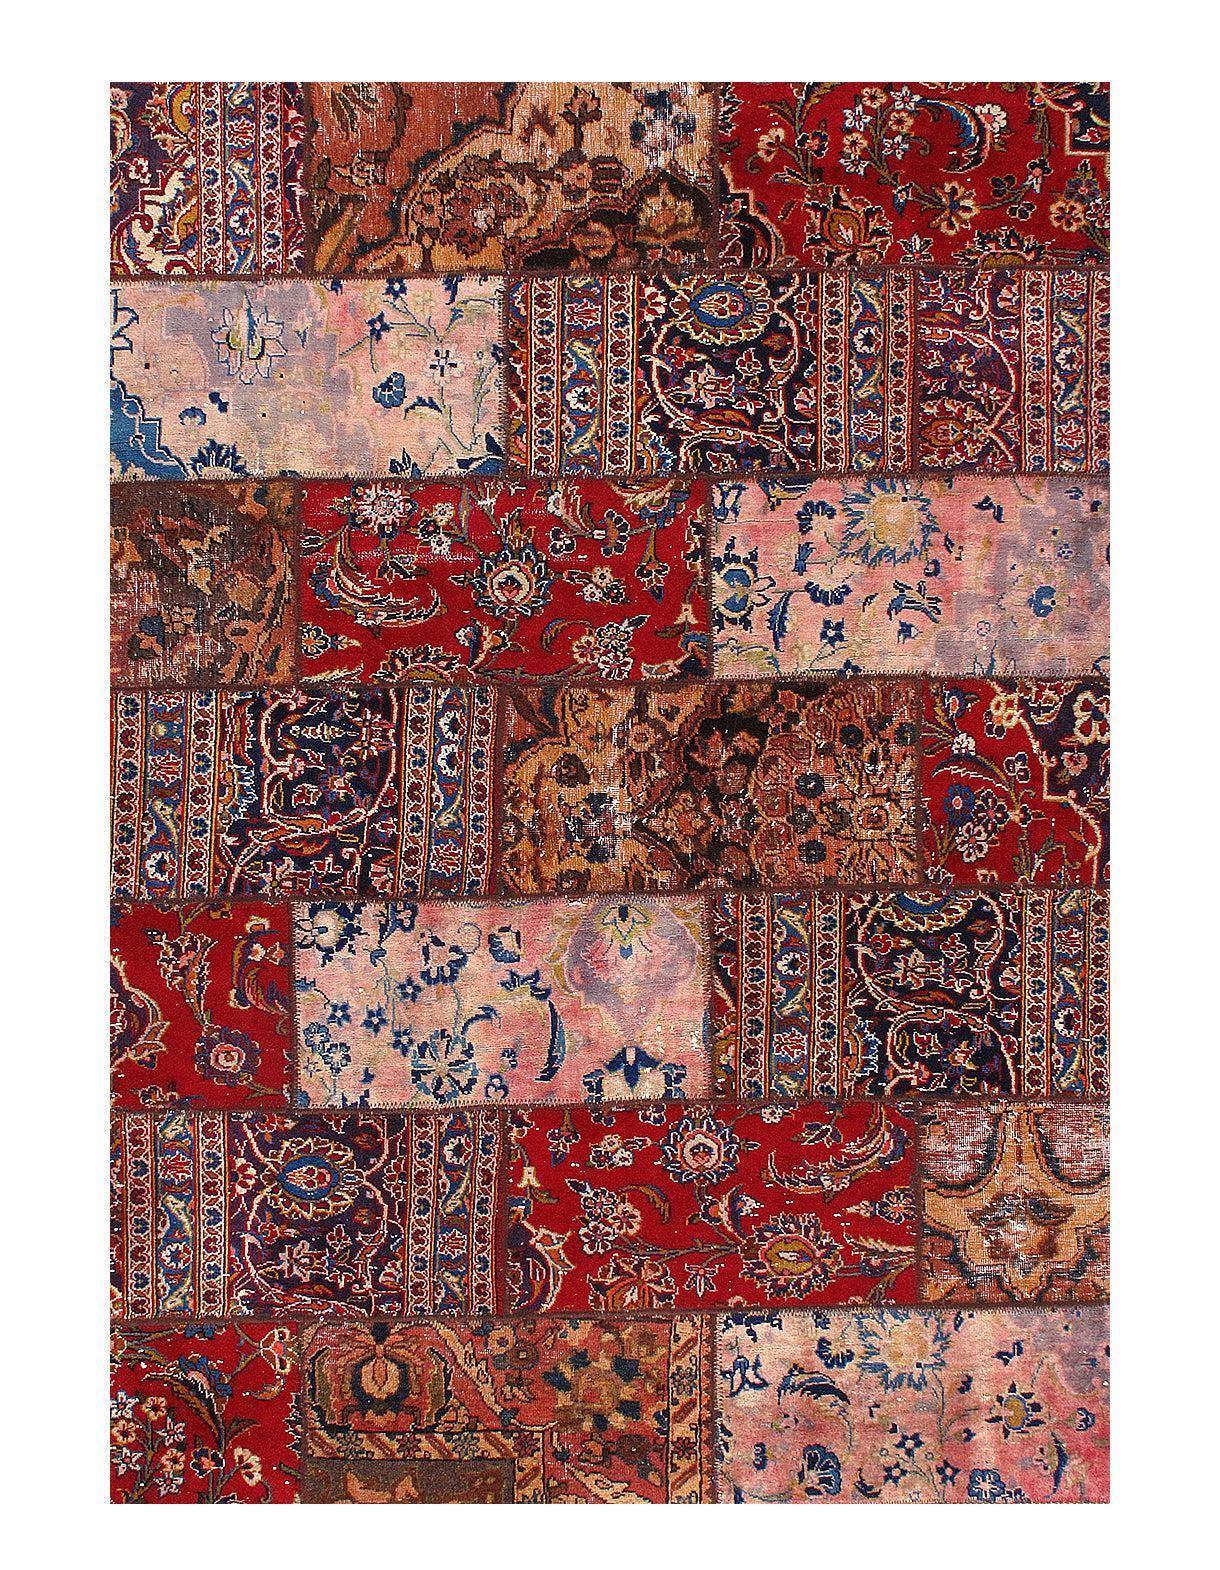 Red Persian Patch work rug 5 x7